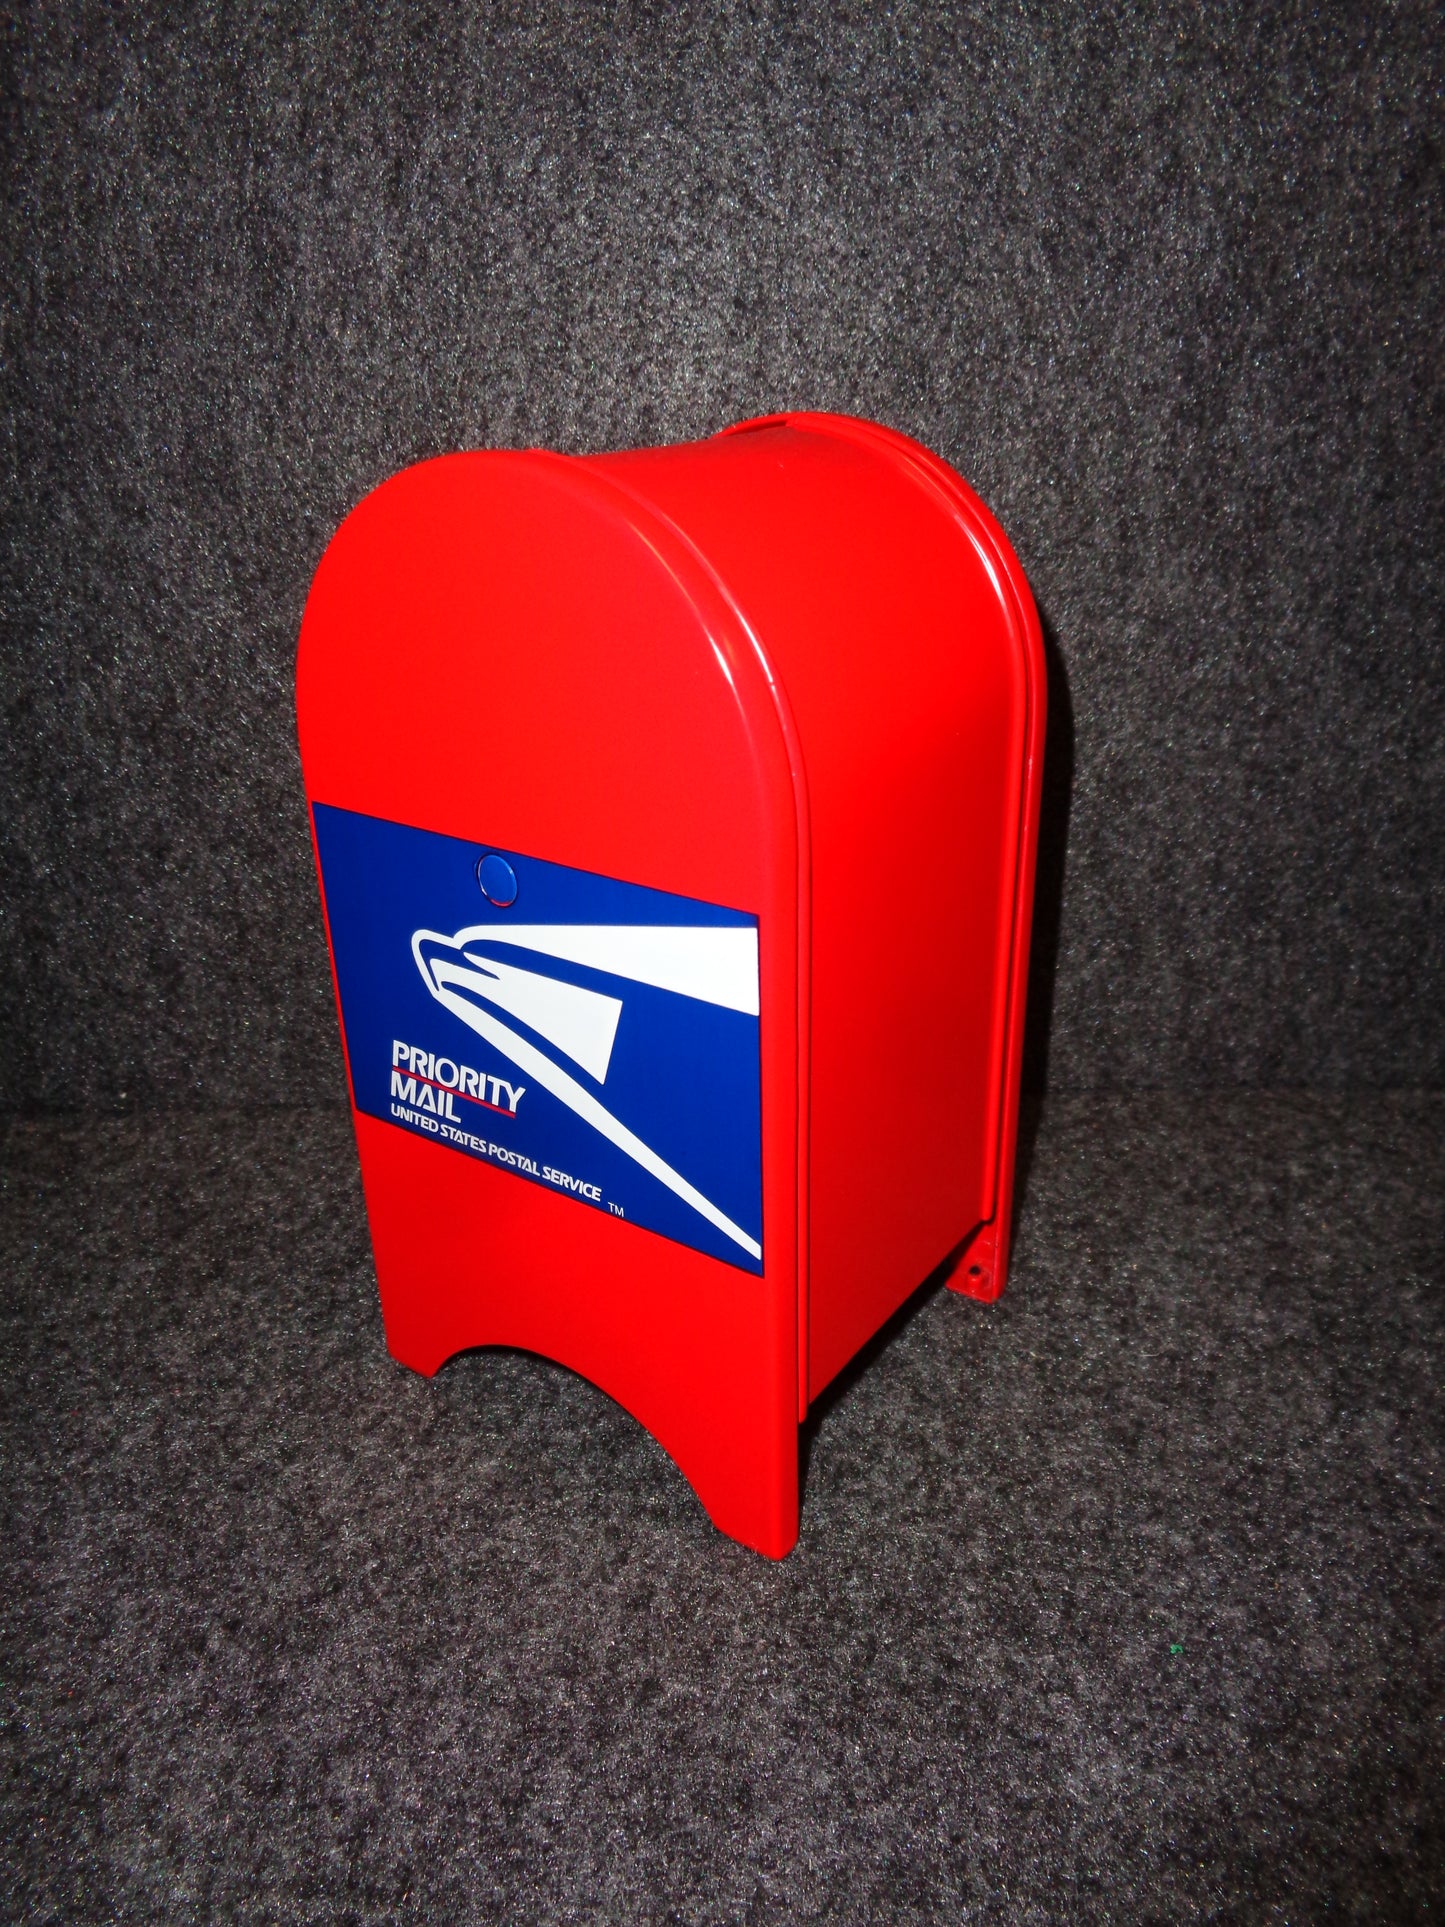 U.S. Mail Priority Mailbox Coin Bank Replica - Red